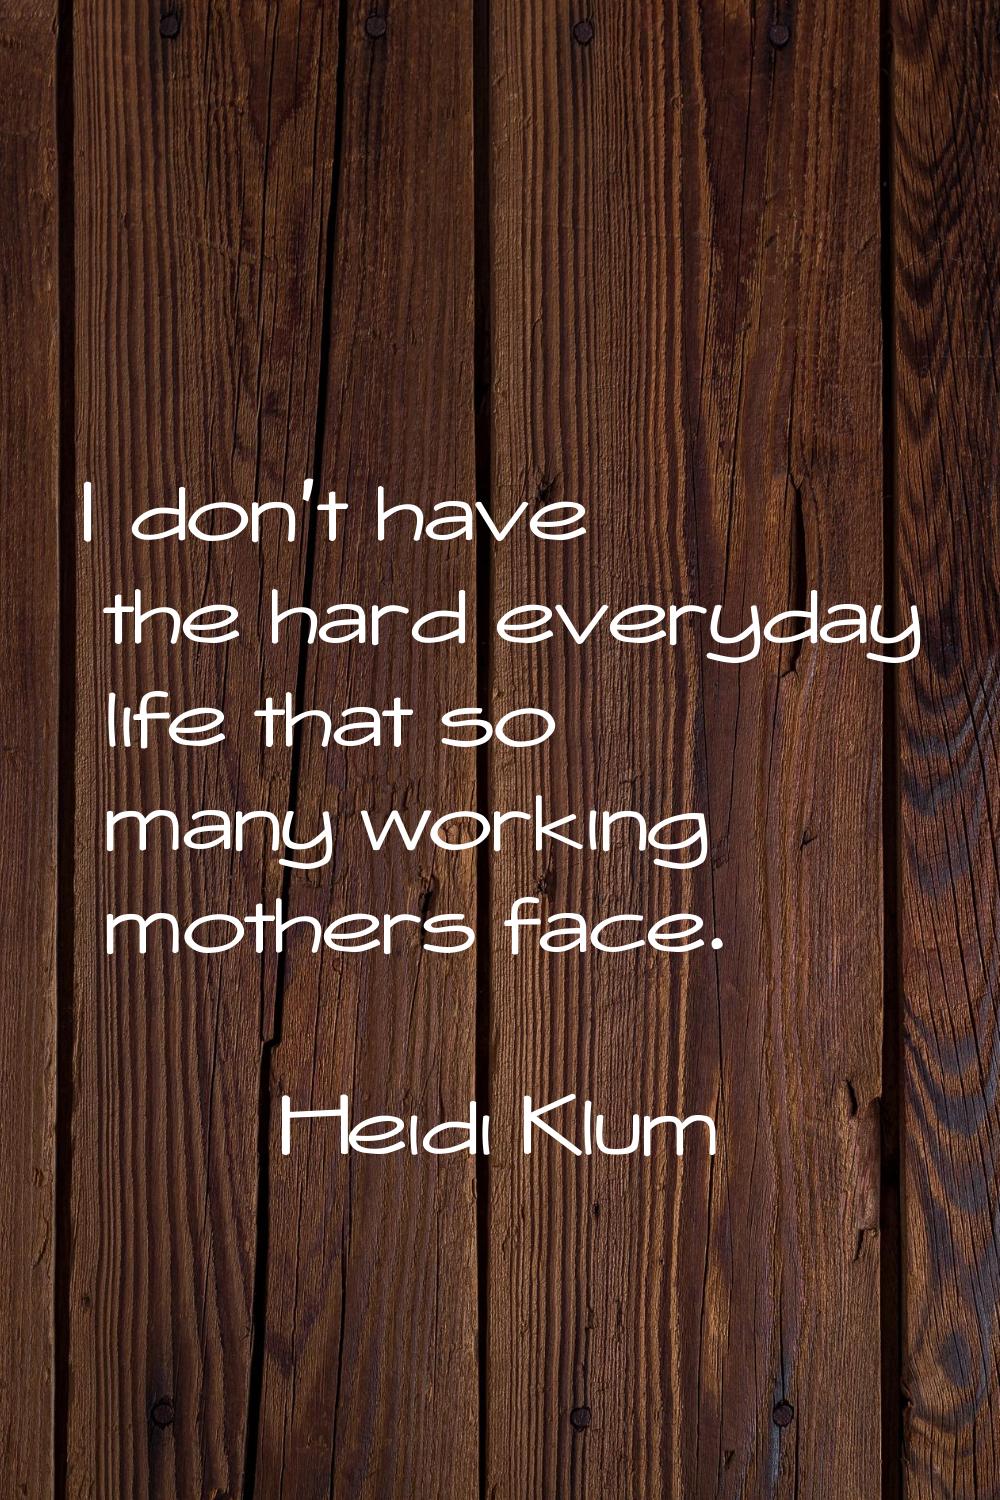 I don't have the hard everyday life that so many working mothers face.